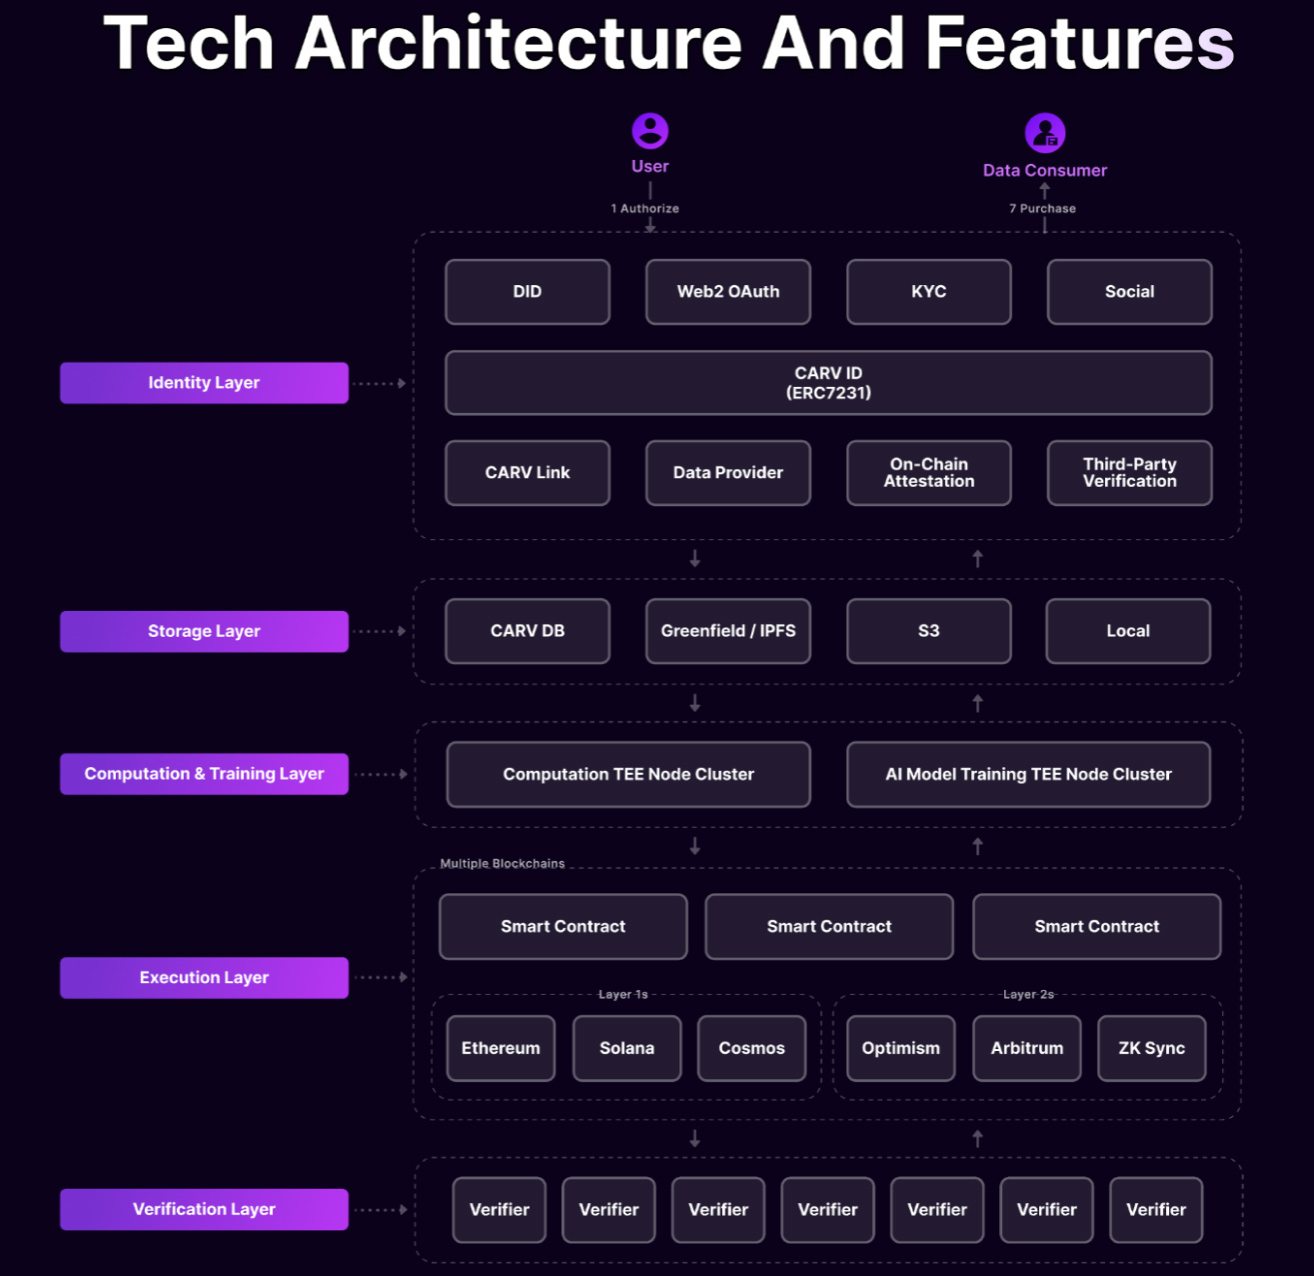 Tech Architecture and Features